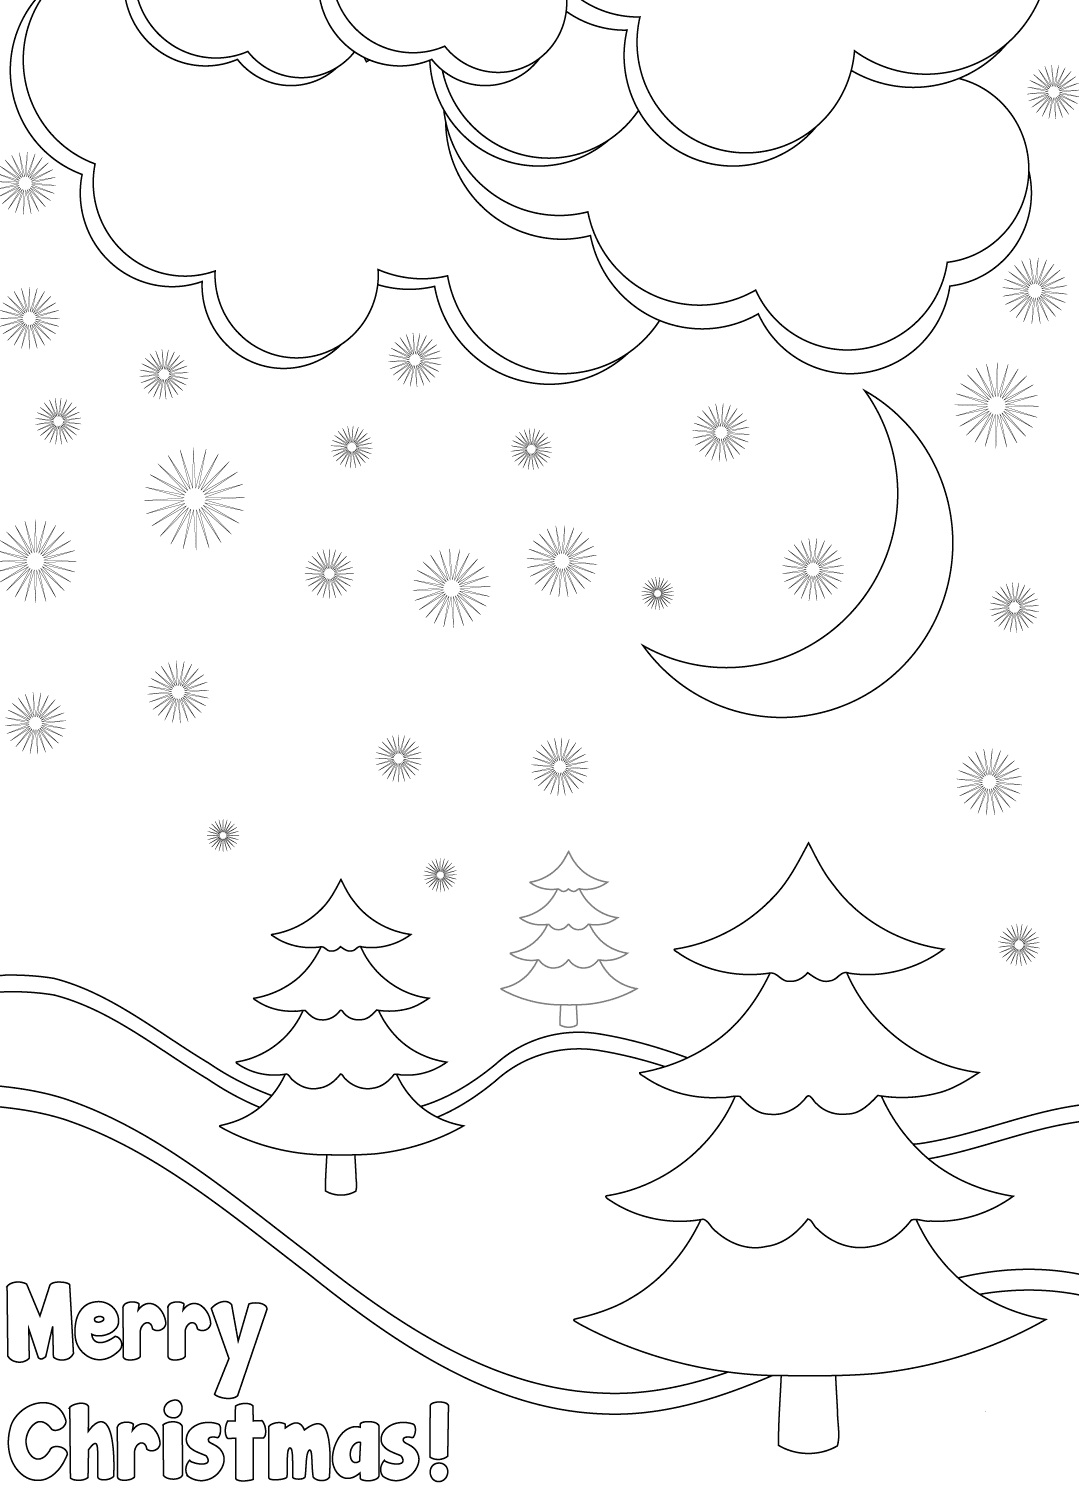 Winter Landscape on Christmas Day Coloring Pages